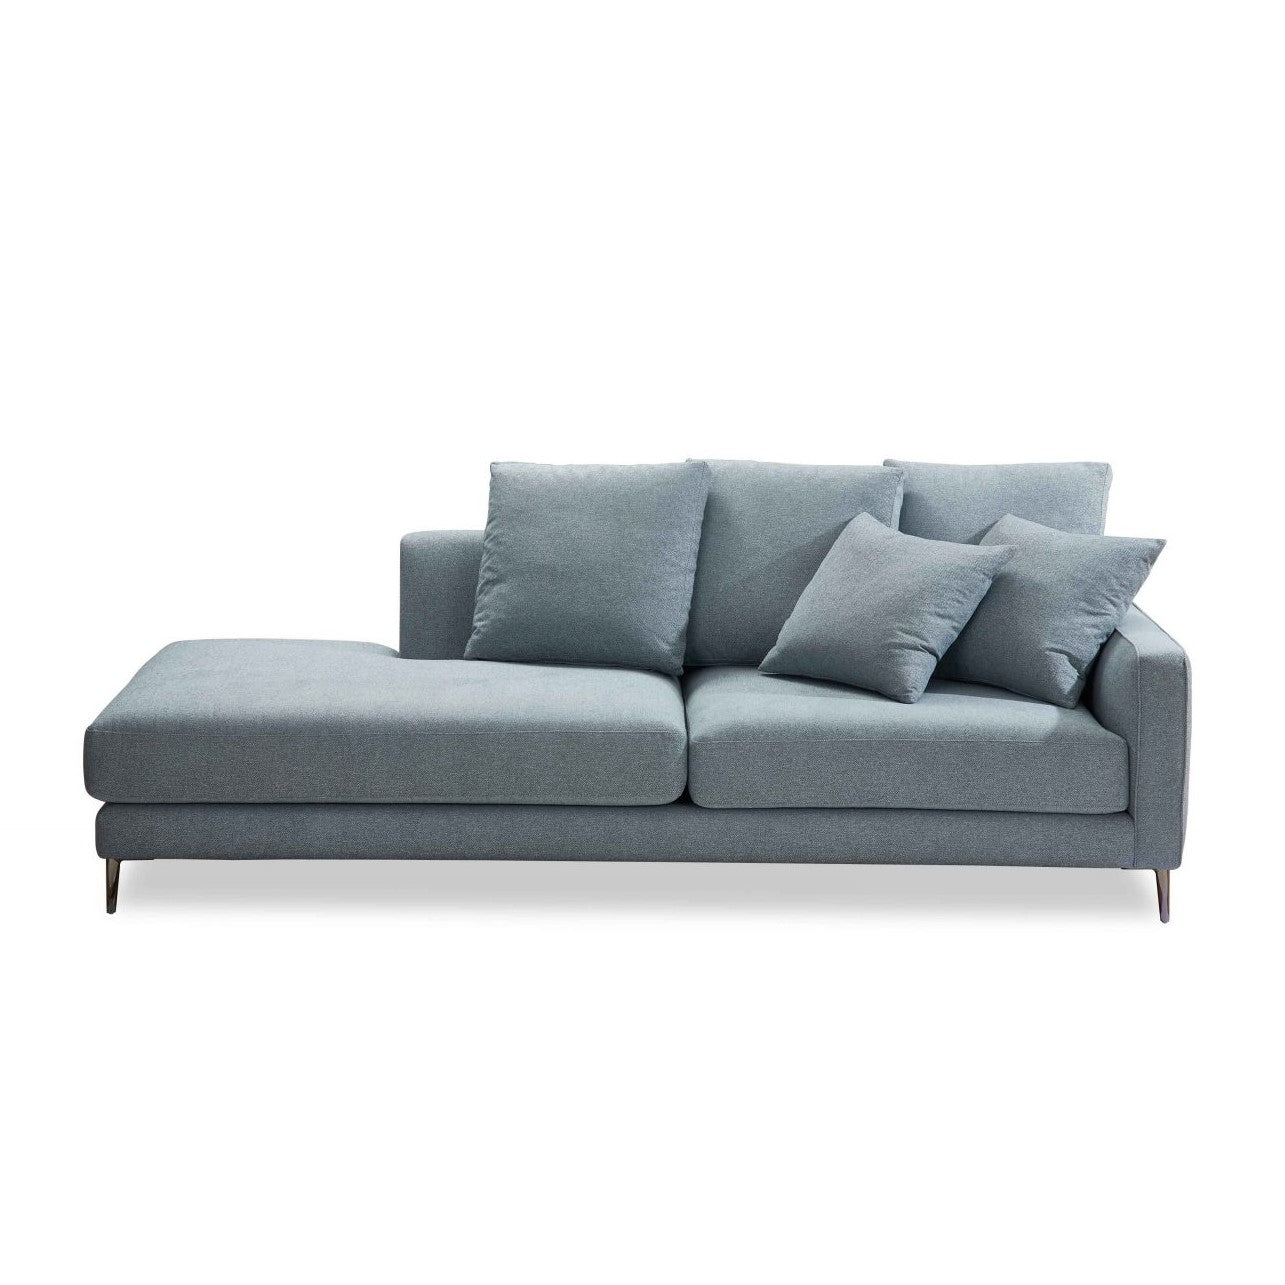 Parker Daybed Sofa by Molmic available from Make Your House A Home, Furniture Store located in Bendigo, Victoria. Australian Made in Melbourne.